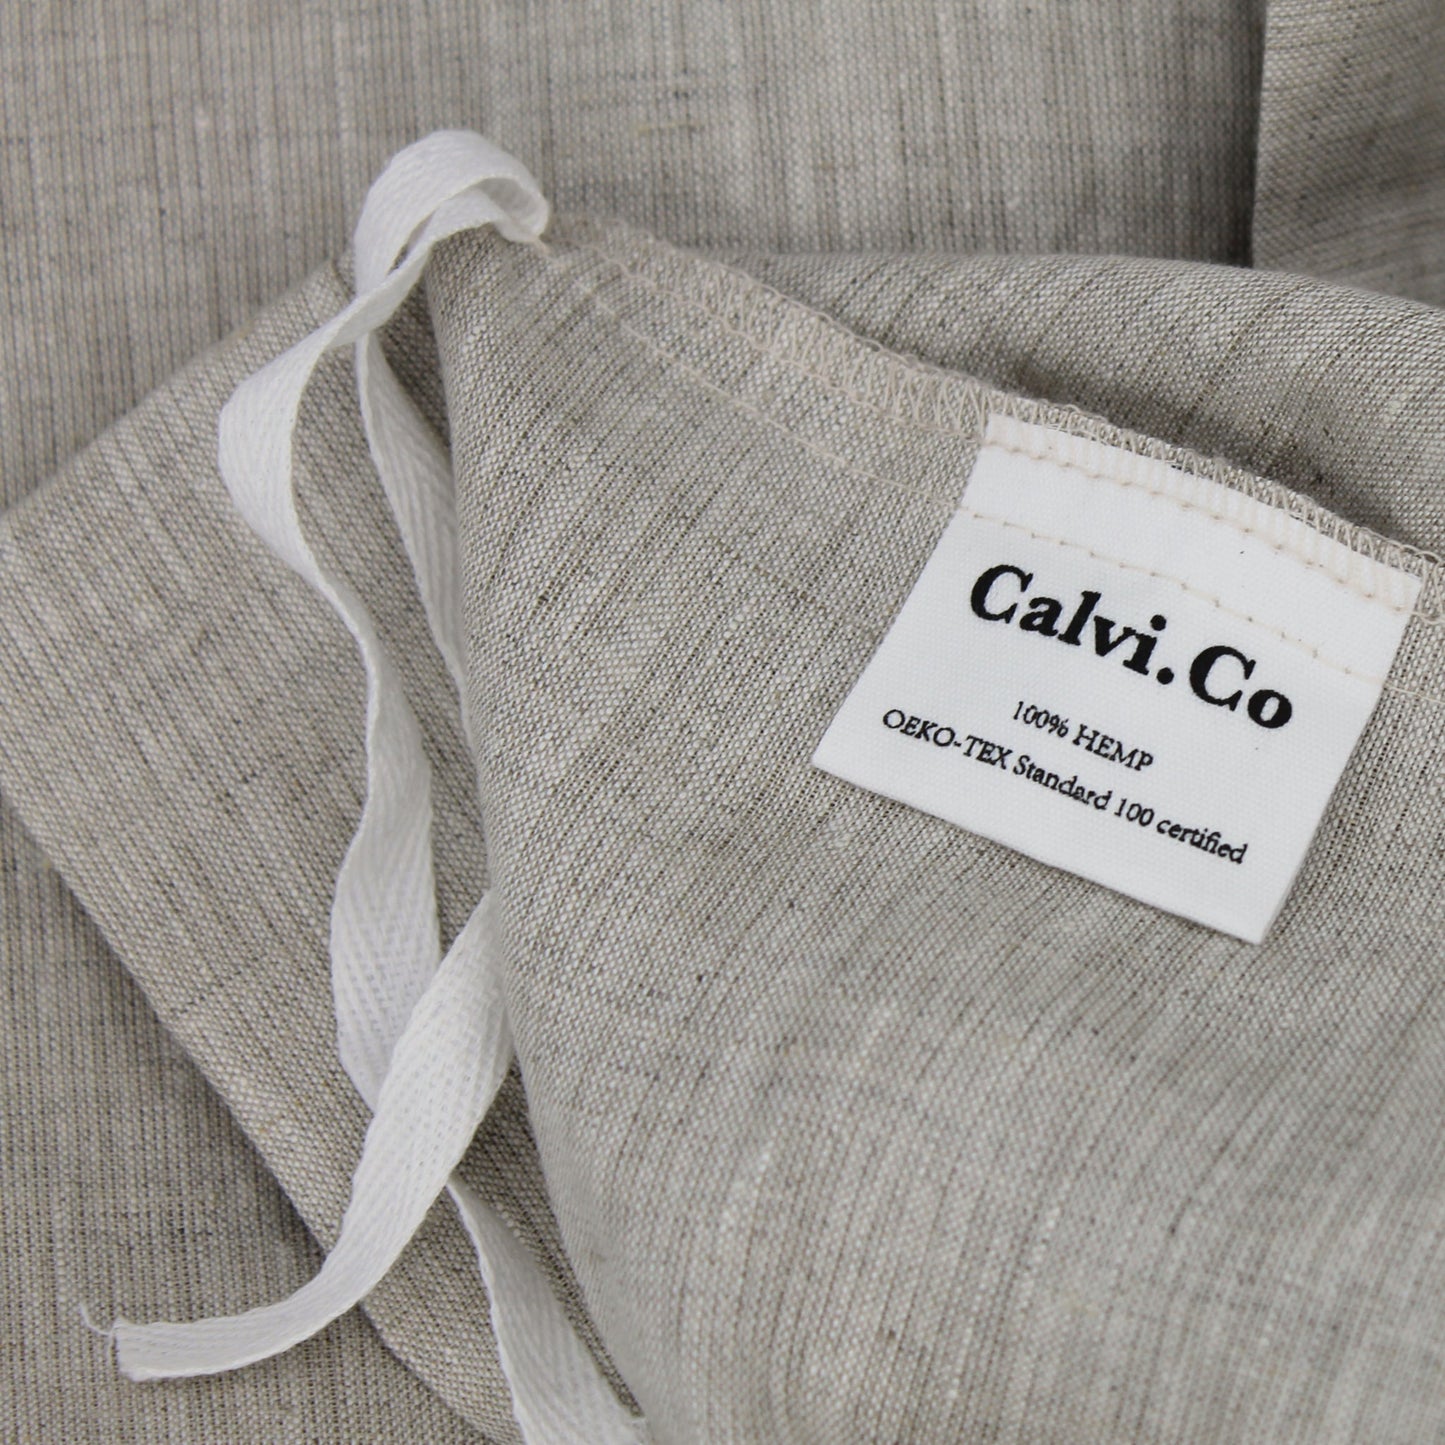 duvet quilt cover set with pillowcases in pebble natural colour with internal doona ties